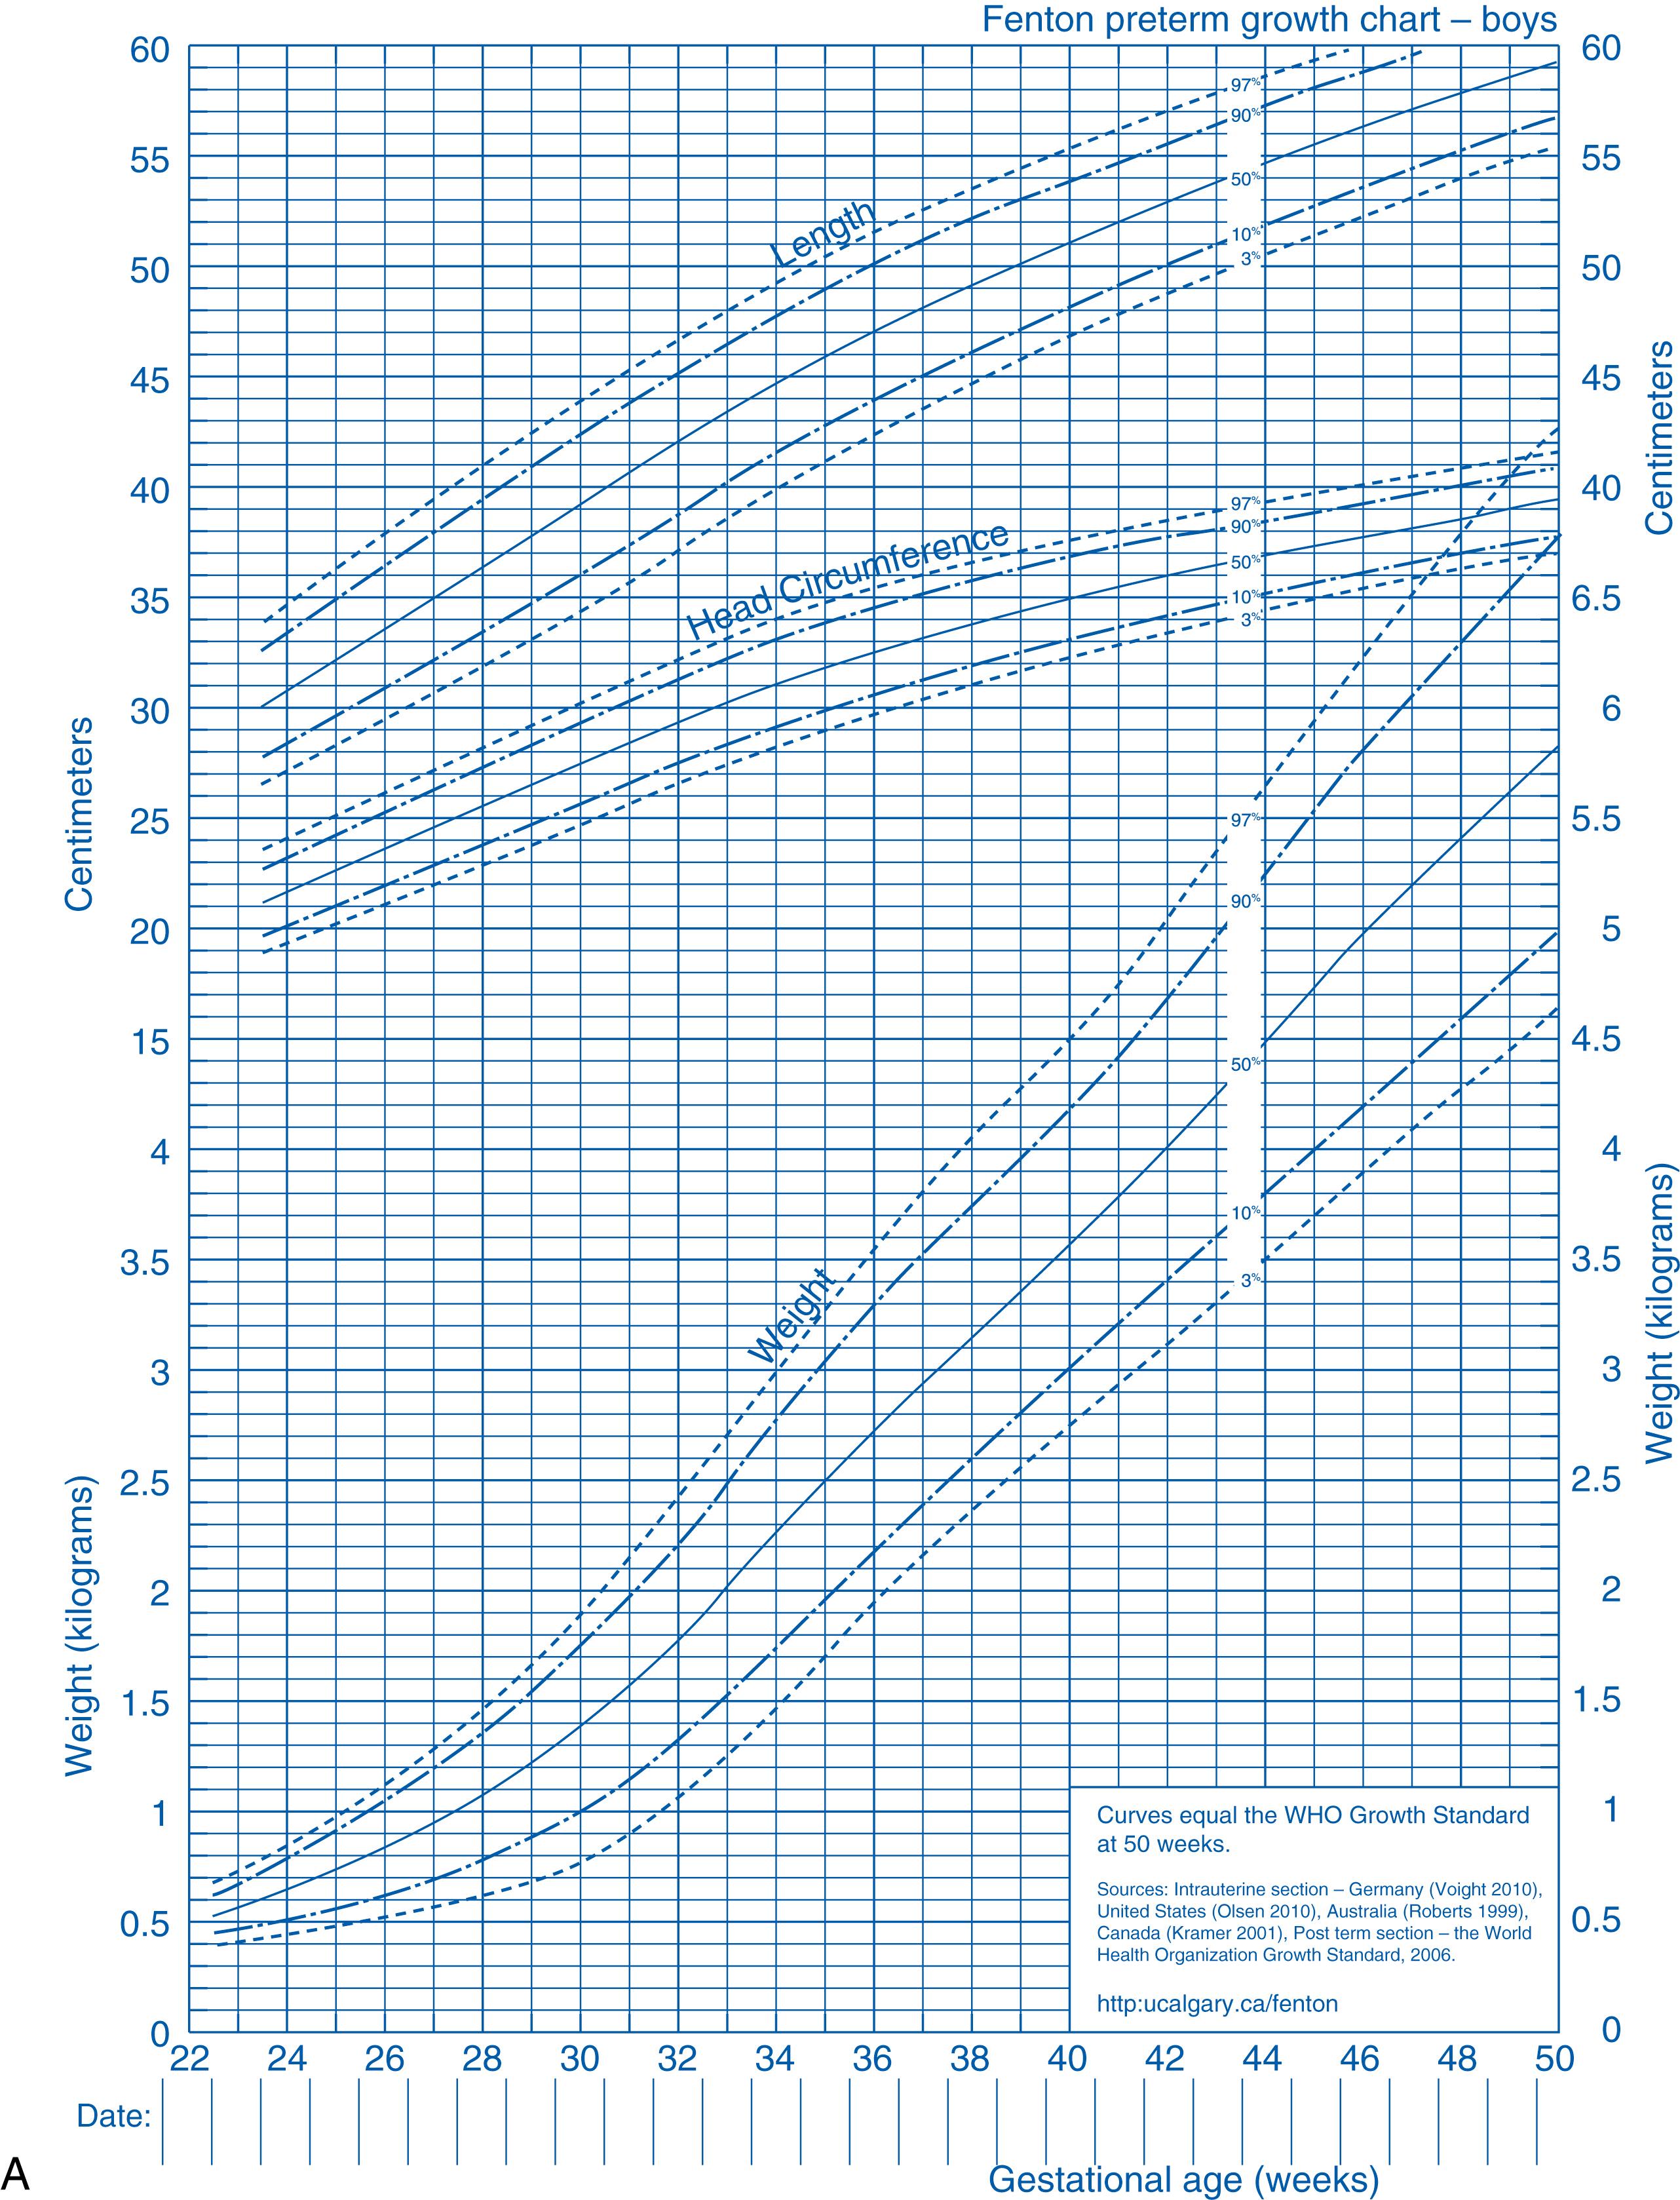 Fig. 22.3, Fenton preterm growth charts for boys (A) and girls (B), updated in 2013. The updated growth curves are gender specific and are based on data from nearly 4 million preterm births, with confirmed or corrected gestational ages in developed countries. They are also based on the currently recommended growth goal for preterm infants, the fetus, and the term infant. They merge smoothly with the World Health Organization’s term infant growth standards.